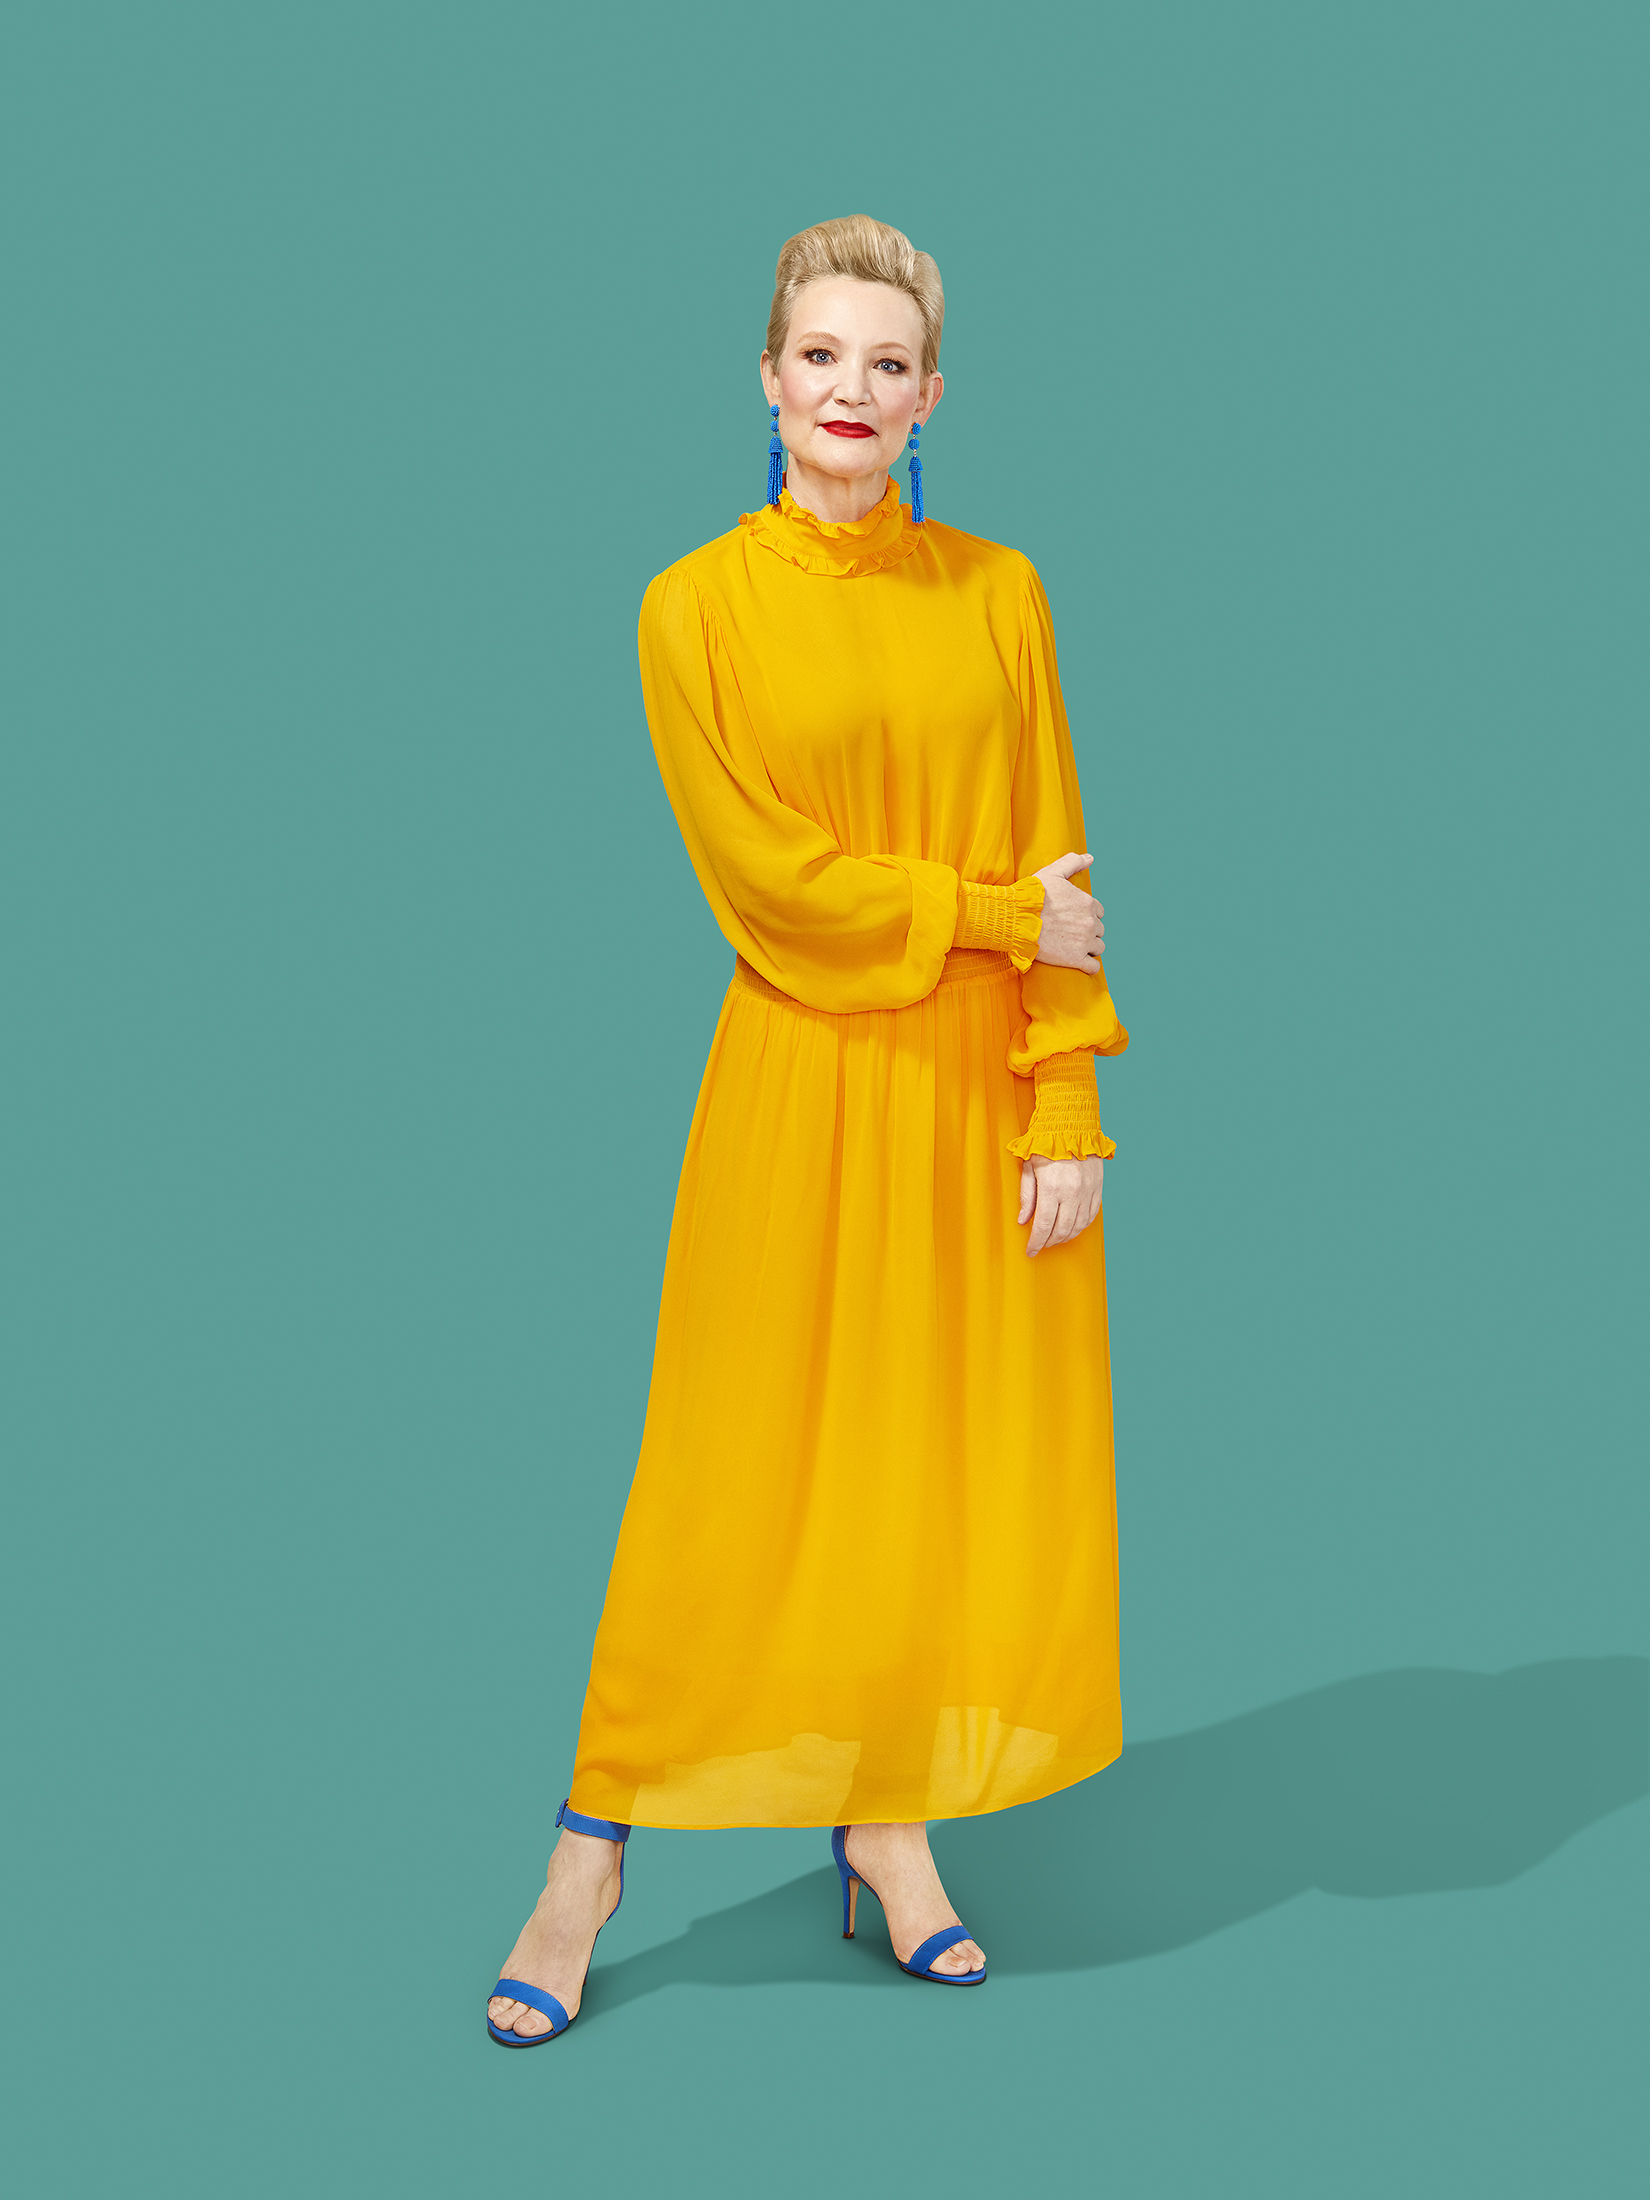 1910_Stelara_Carrie_2662_Flat_NewColor_Final_web